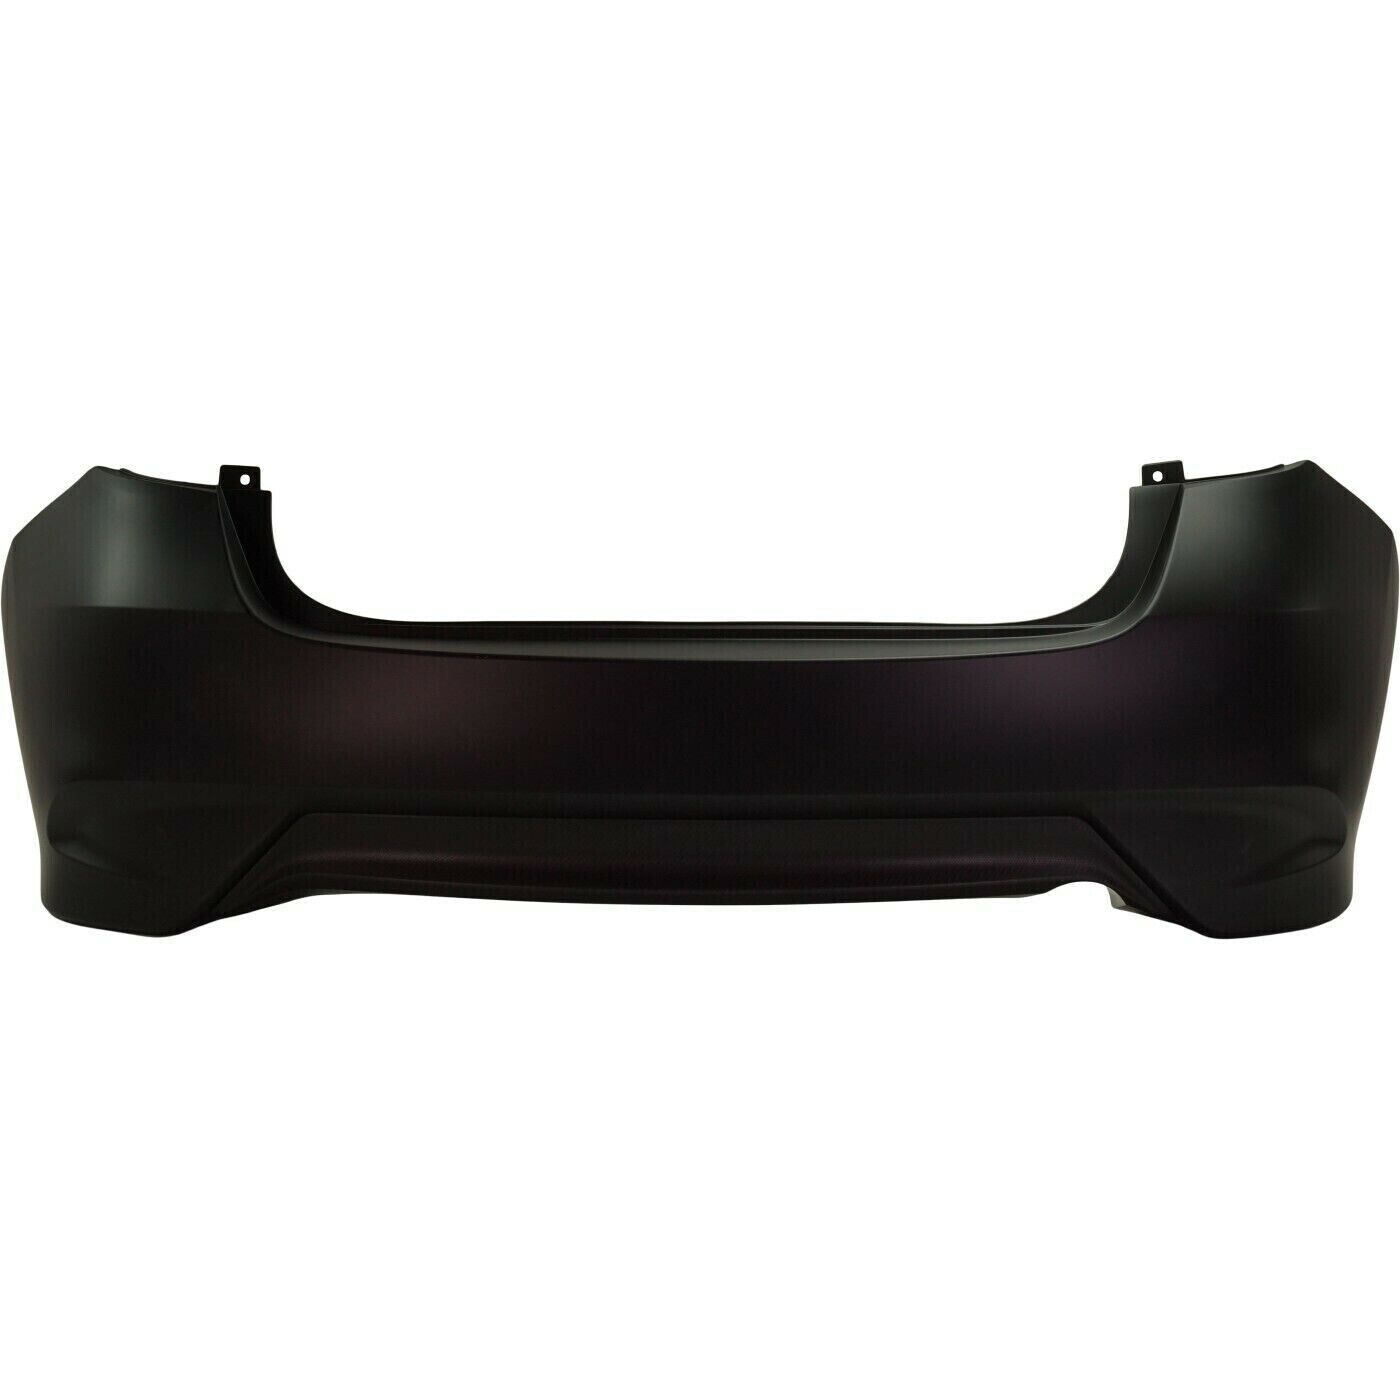 2014-2017 NISSAN VERSA; Rear Bumper Cover; SR Model Partial Painted to Match